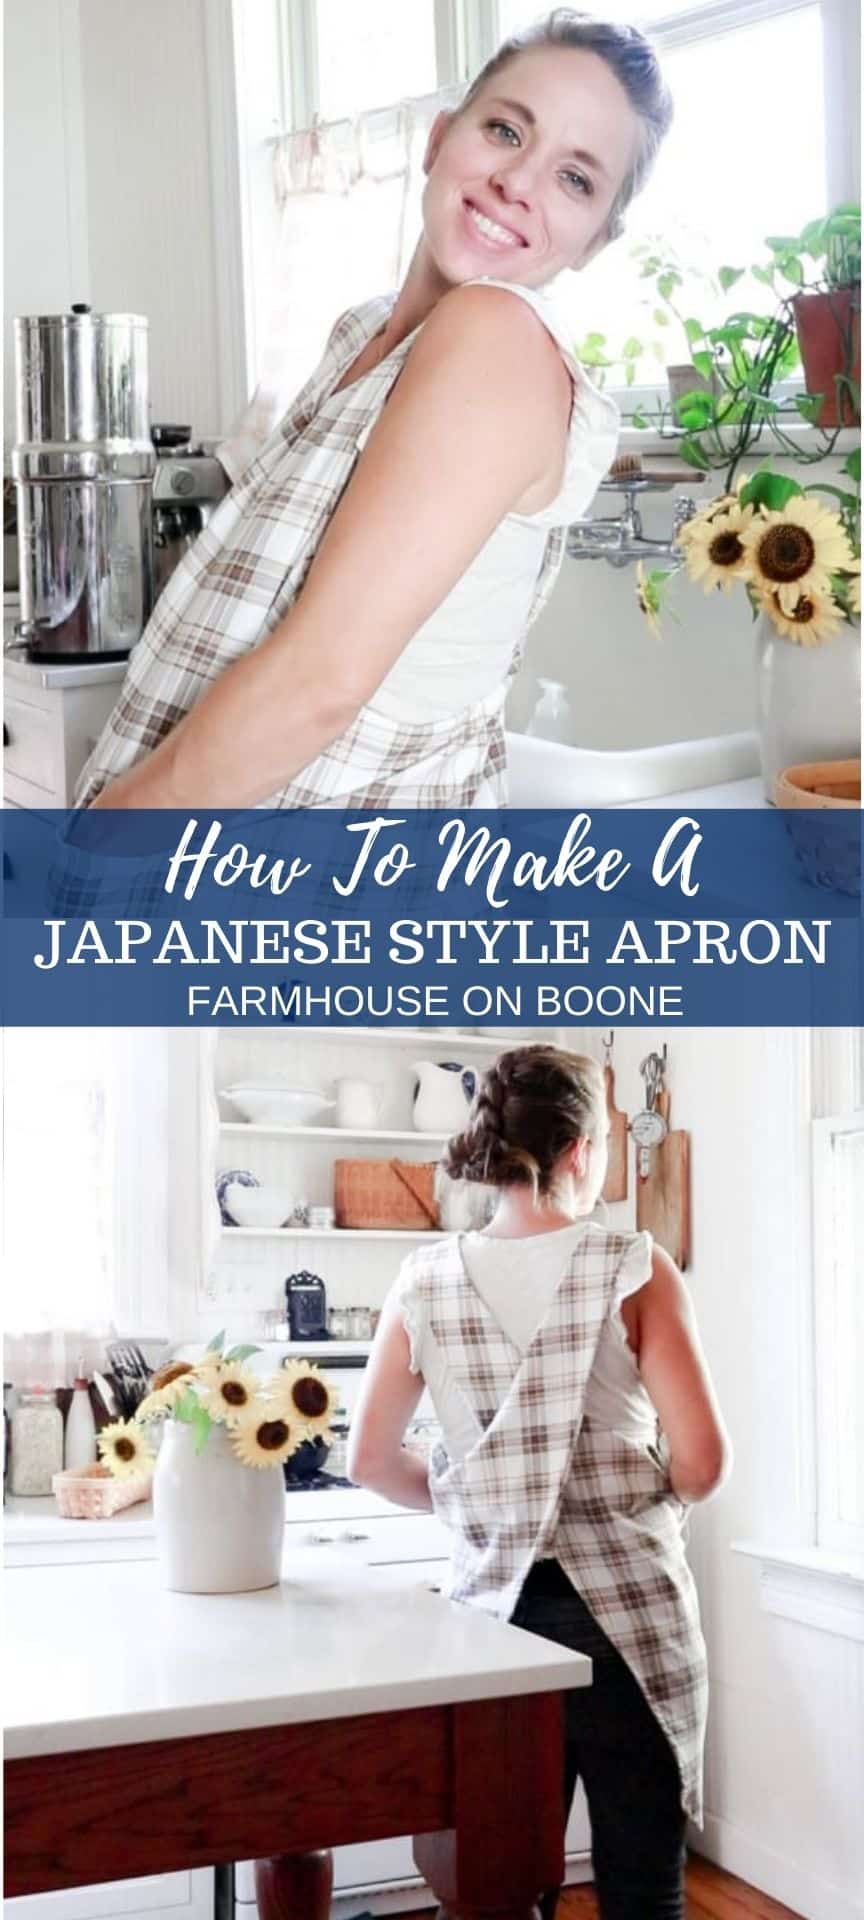 Japanese Apron Tutorial With Free PDF Pattern - Farmhouse on Boone